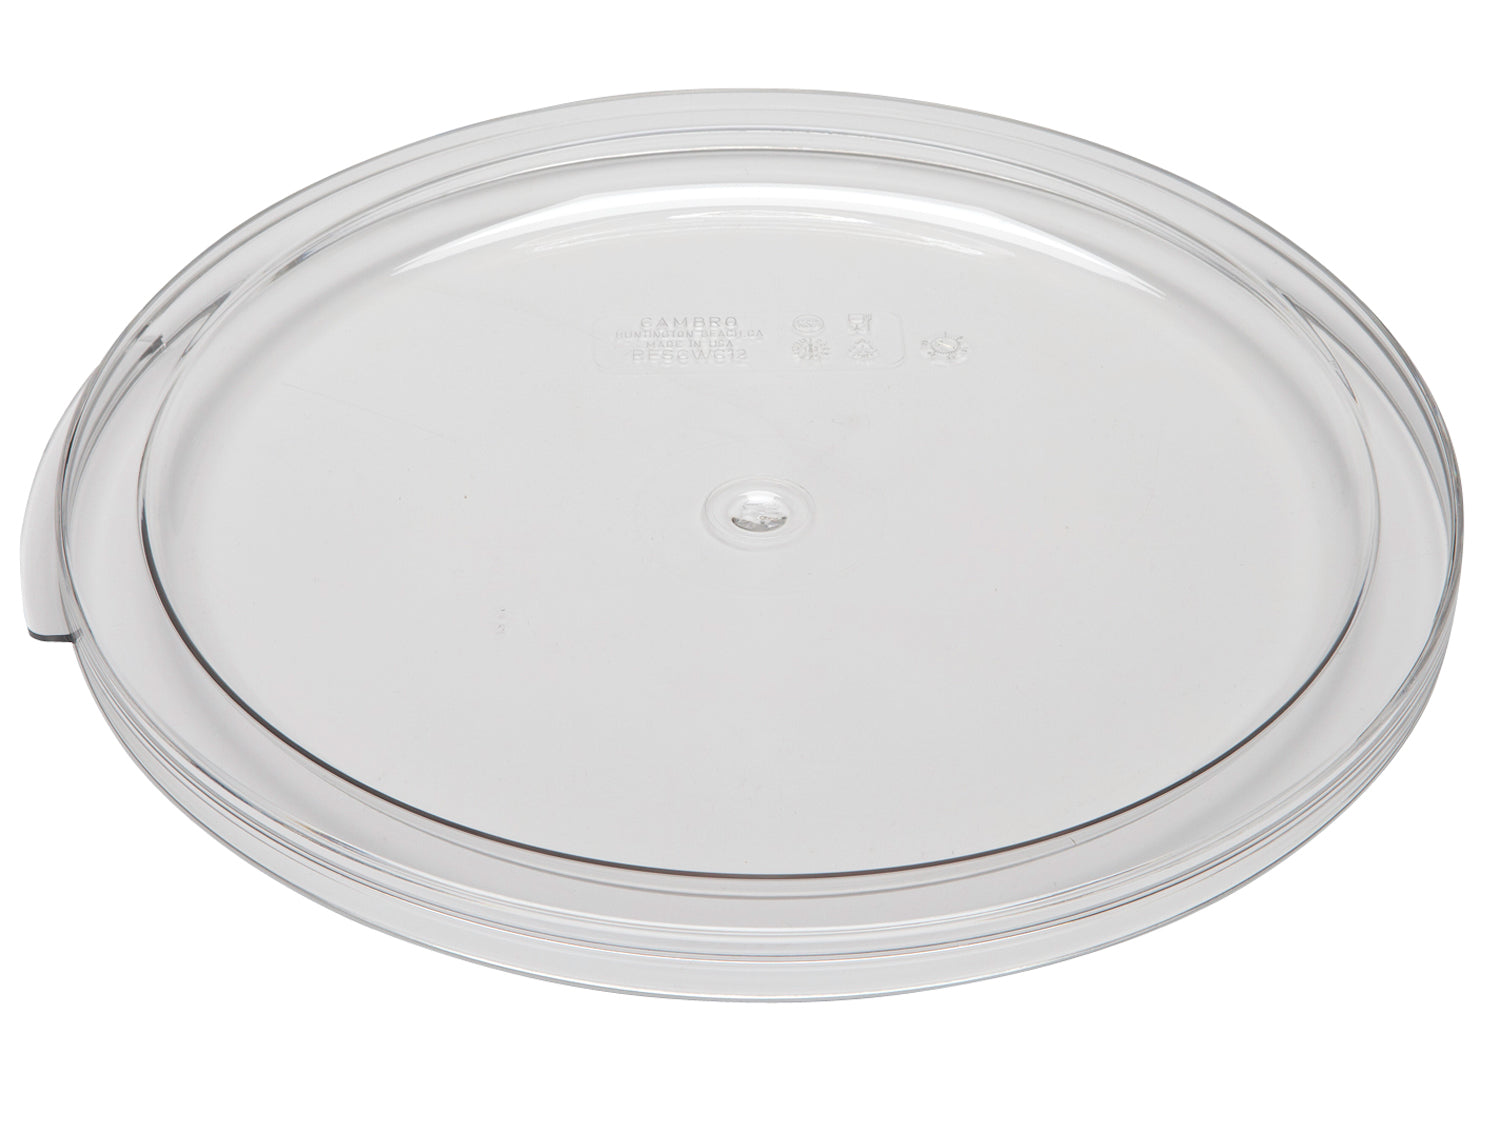 CAMBRO CAMWEAR FITS 12,18, AND 22 QUART CLEARPOLYCARBONATE COVER LID, 1 - 1 EA